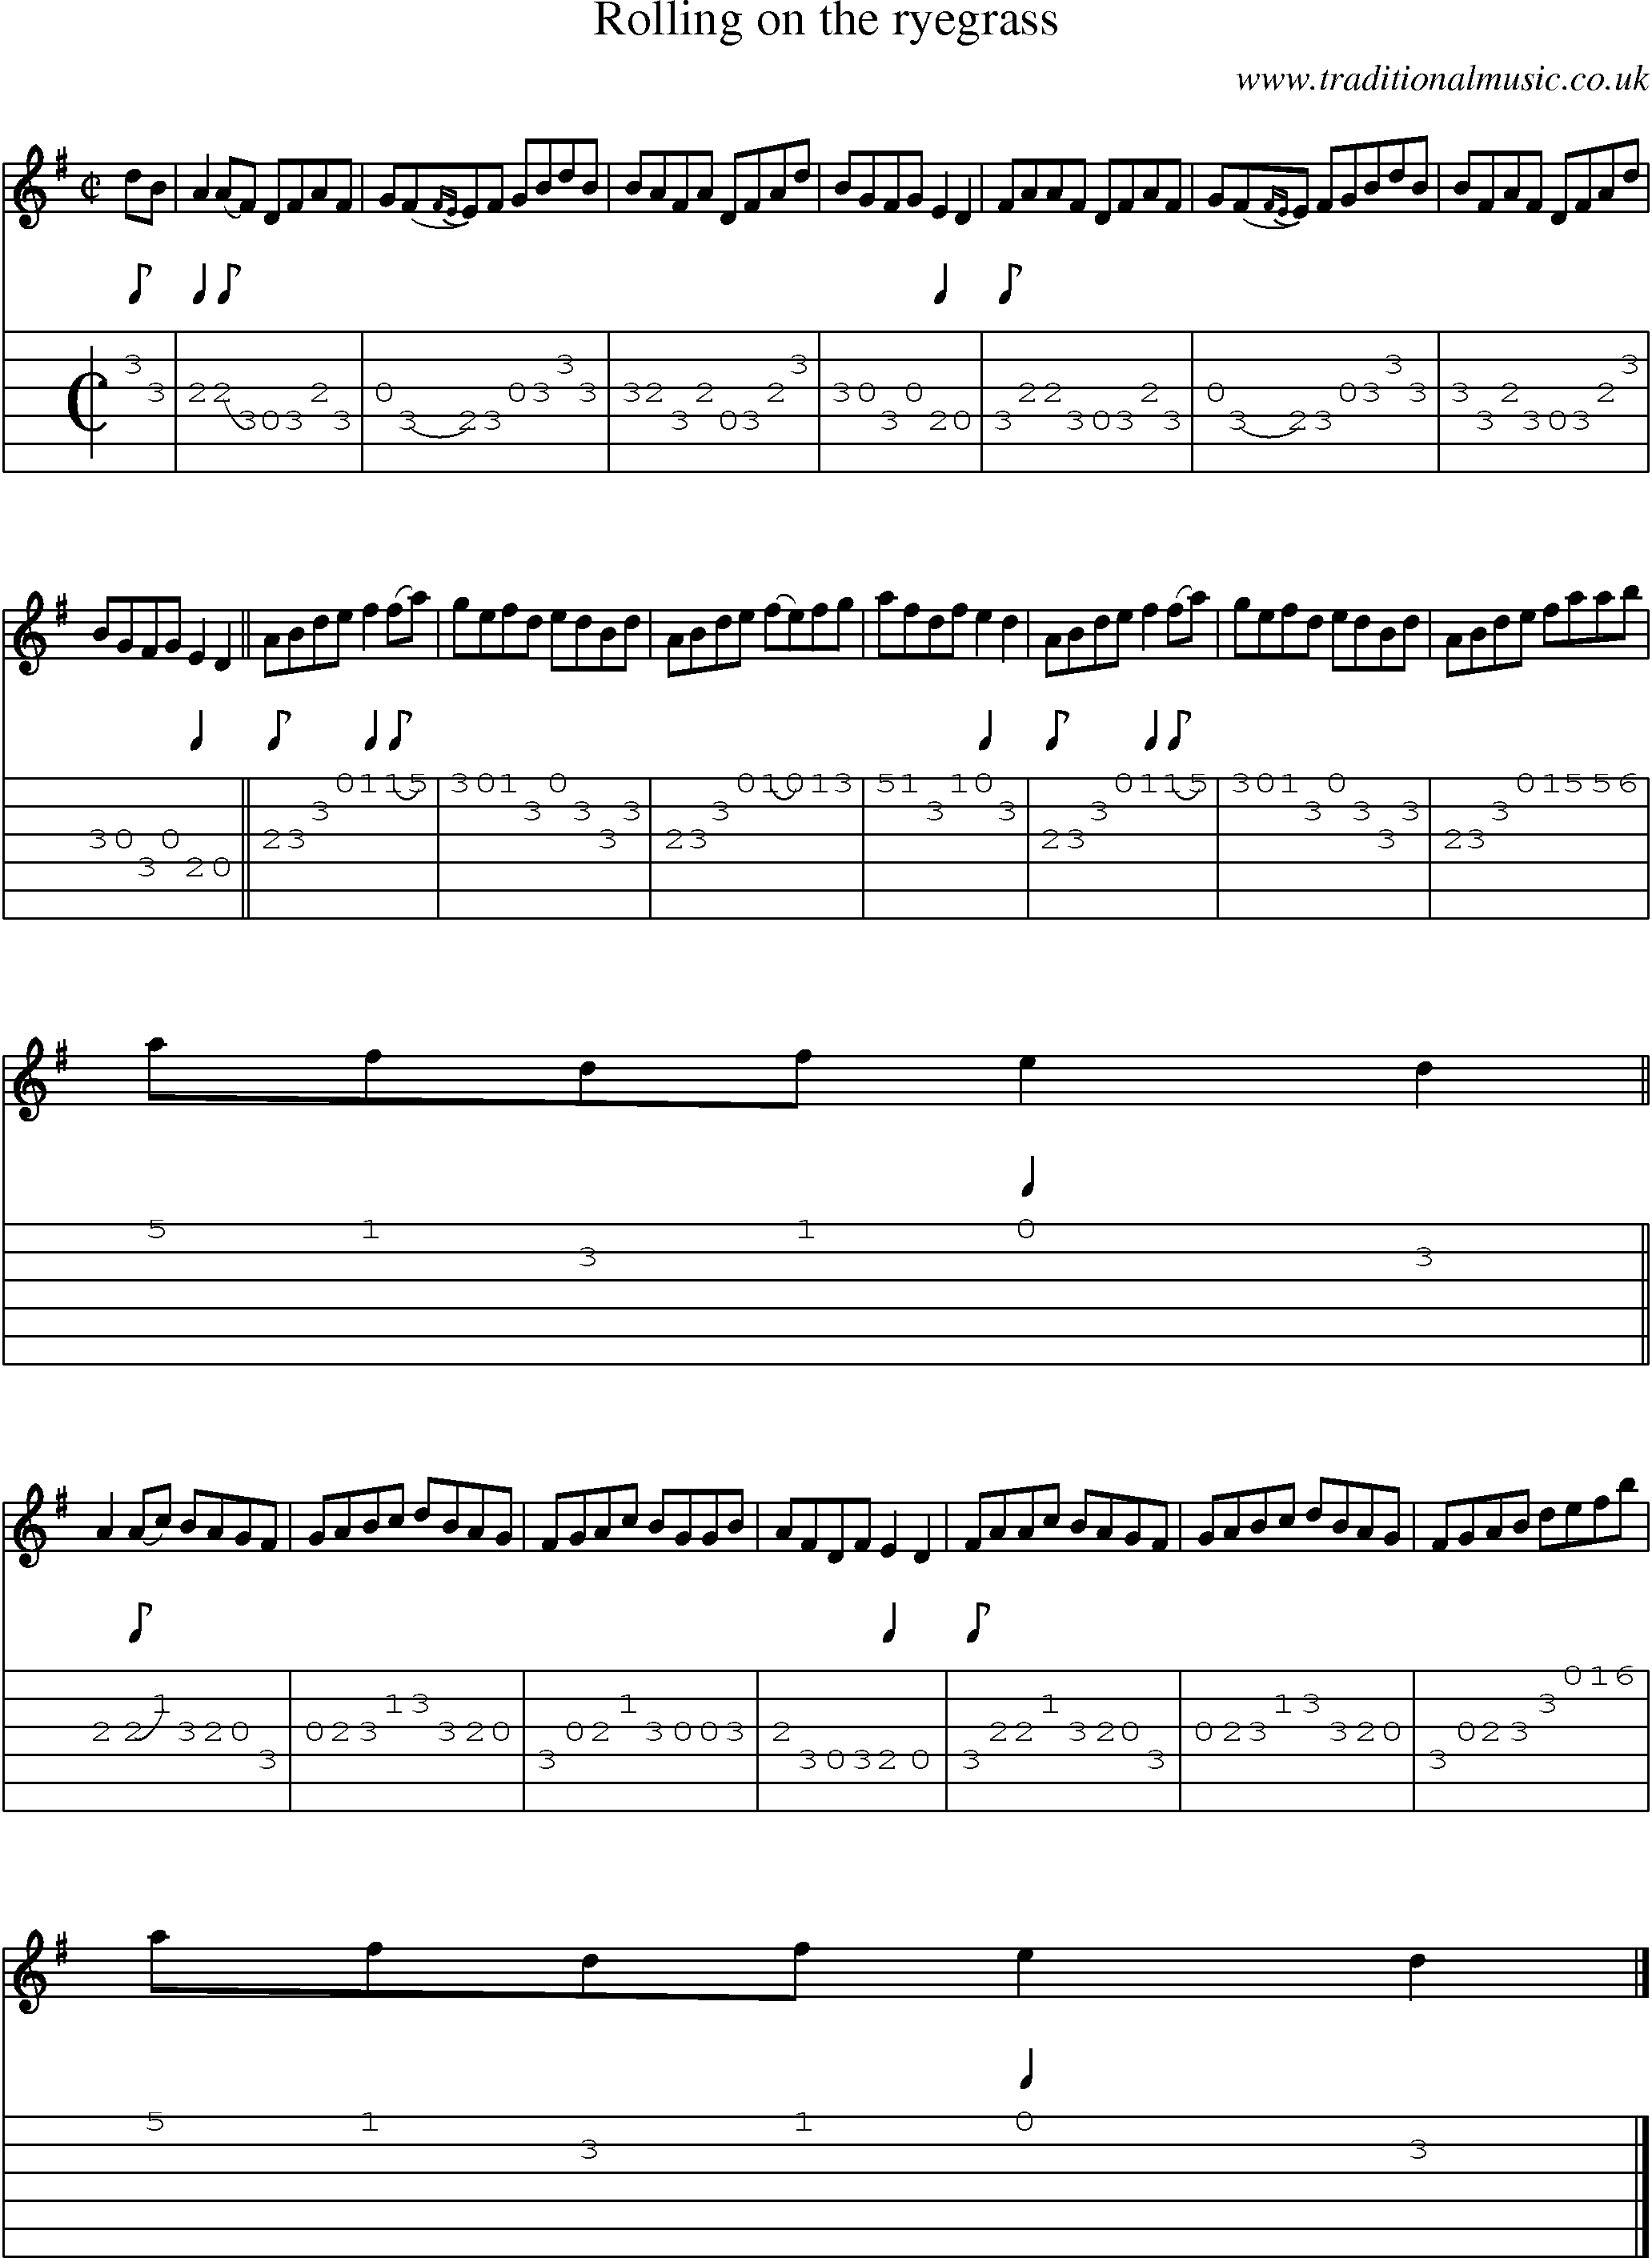 Music Score and Guitar Tabs for Rolling On The Ryegrass